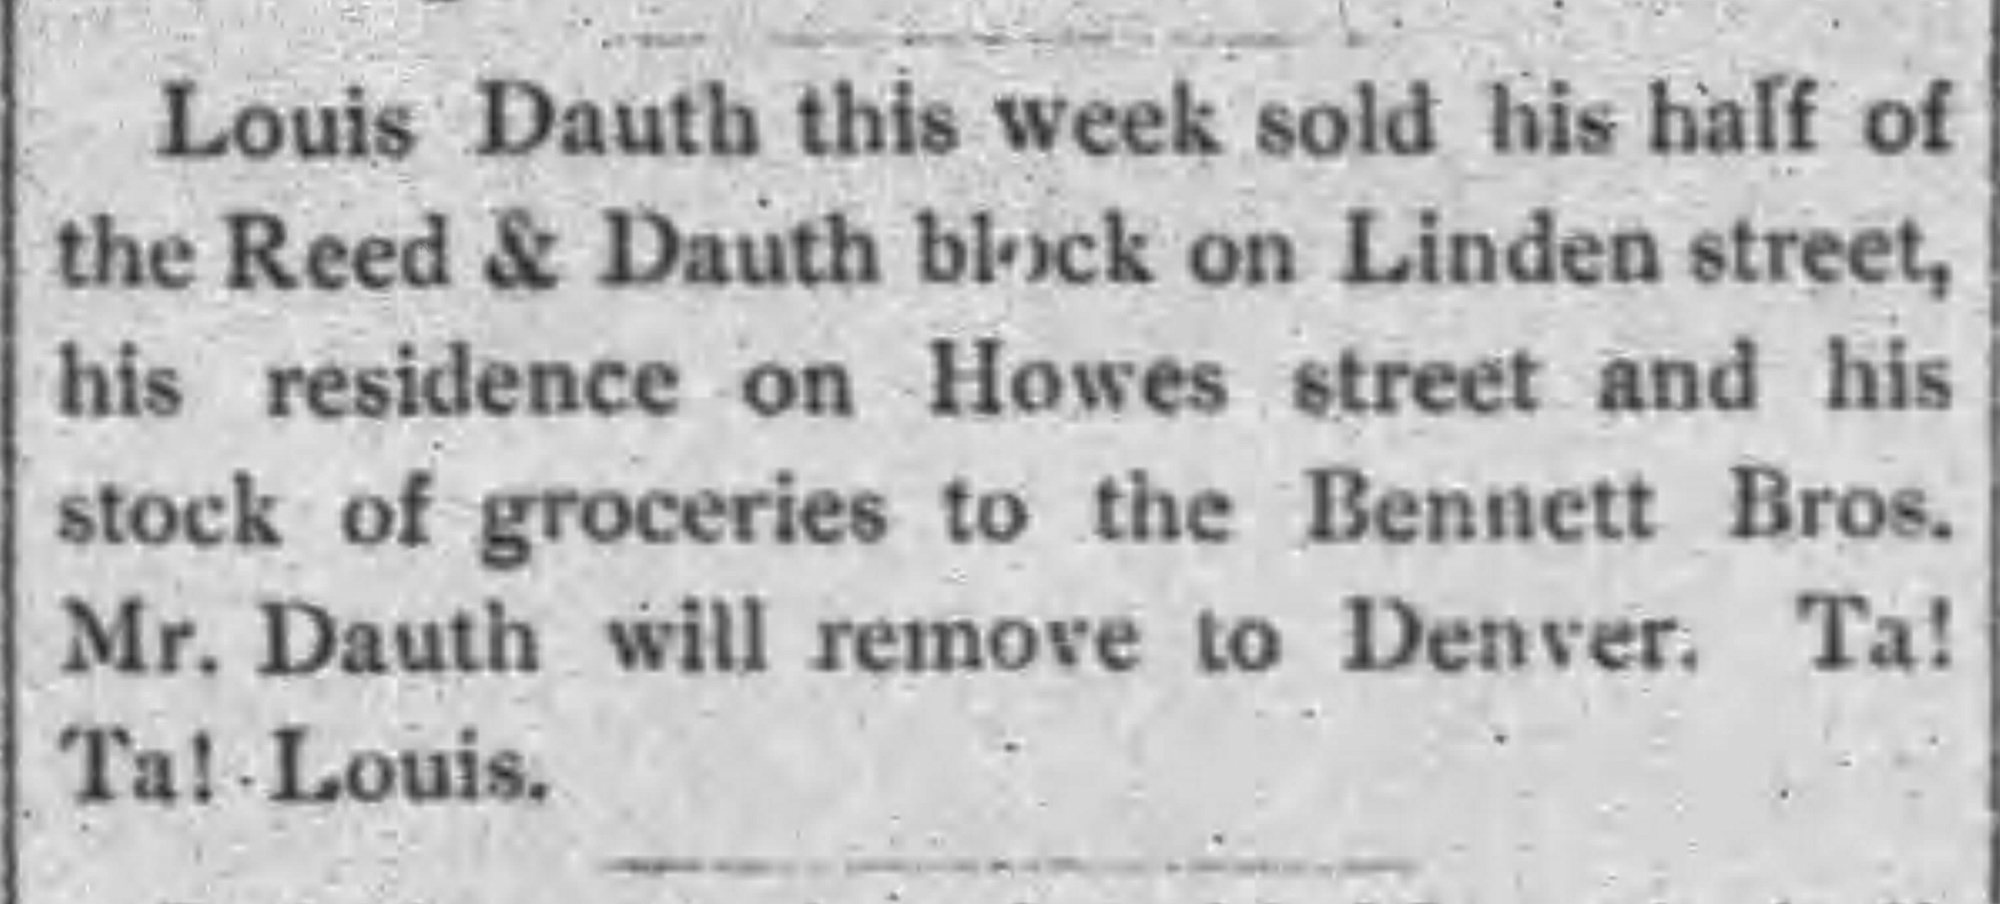 Dauth Family Archive - 1888-02-18 - The Fort Collins Express - Louis Dauth Sells His Store